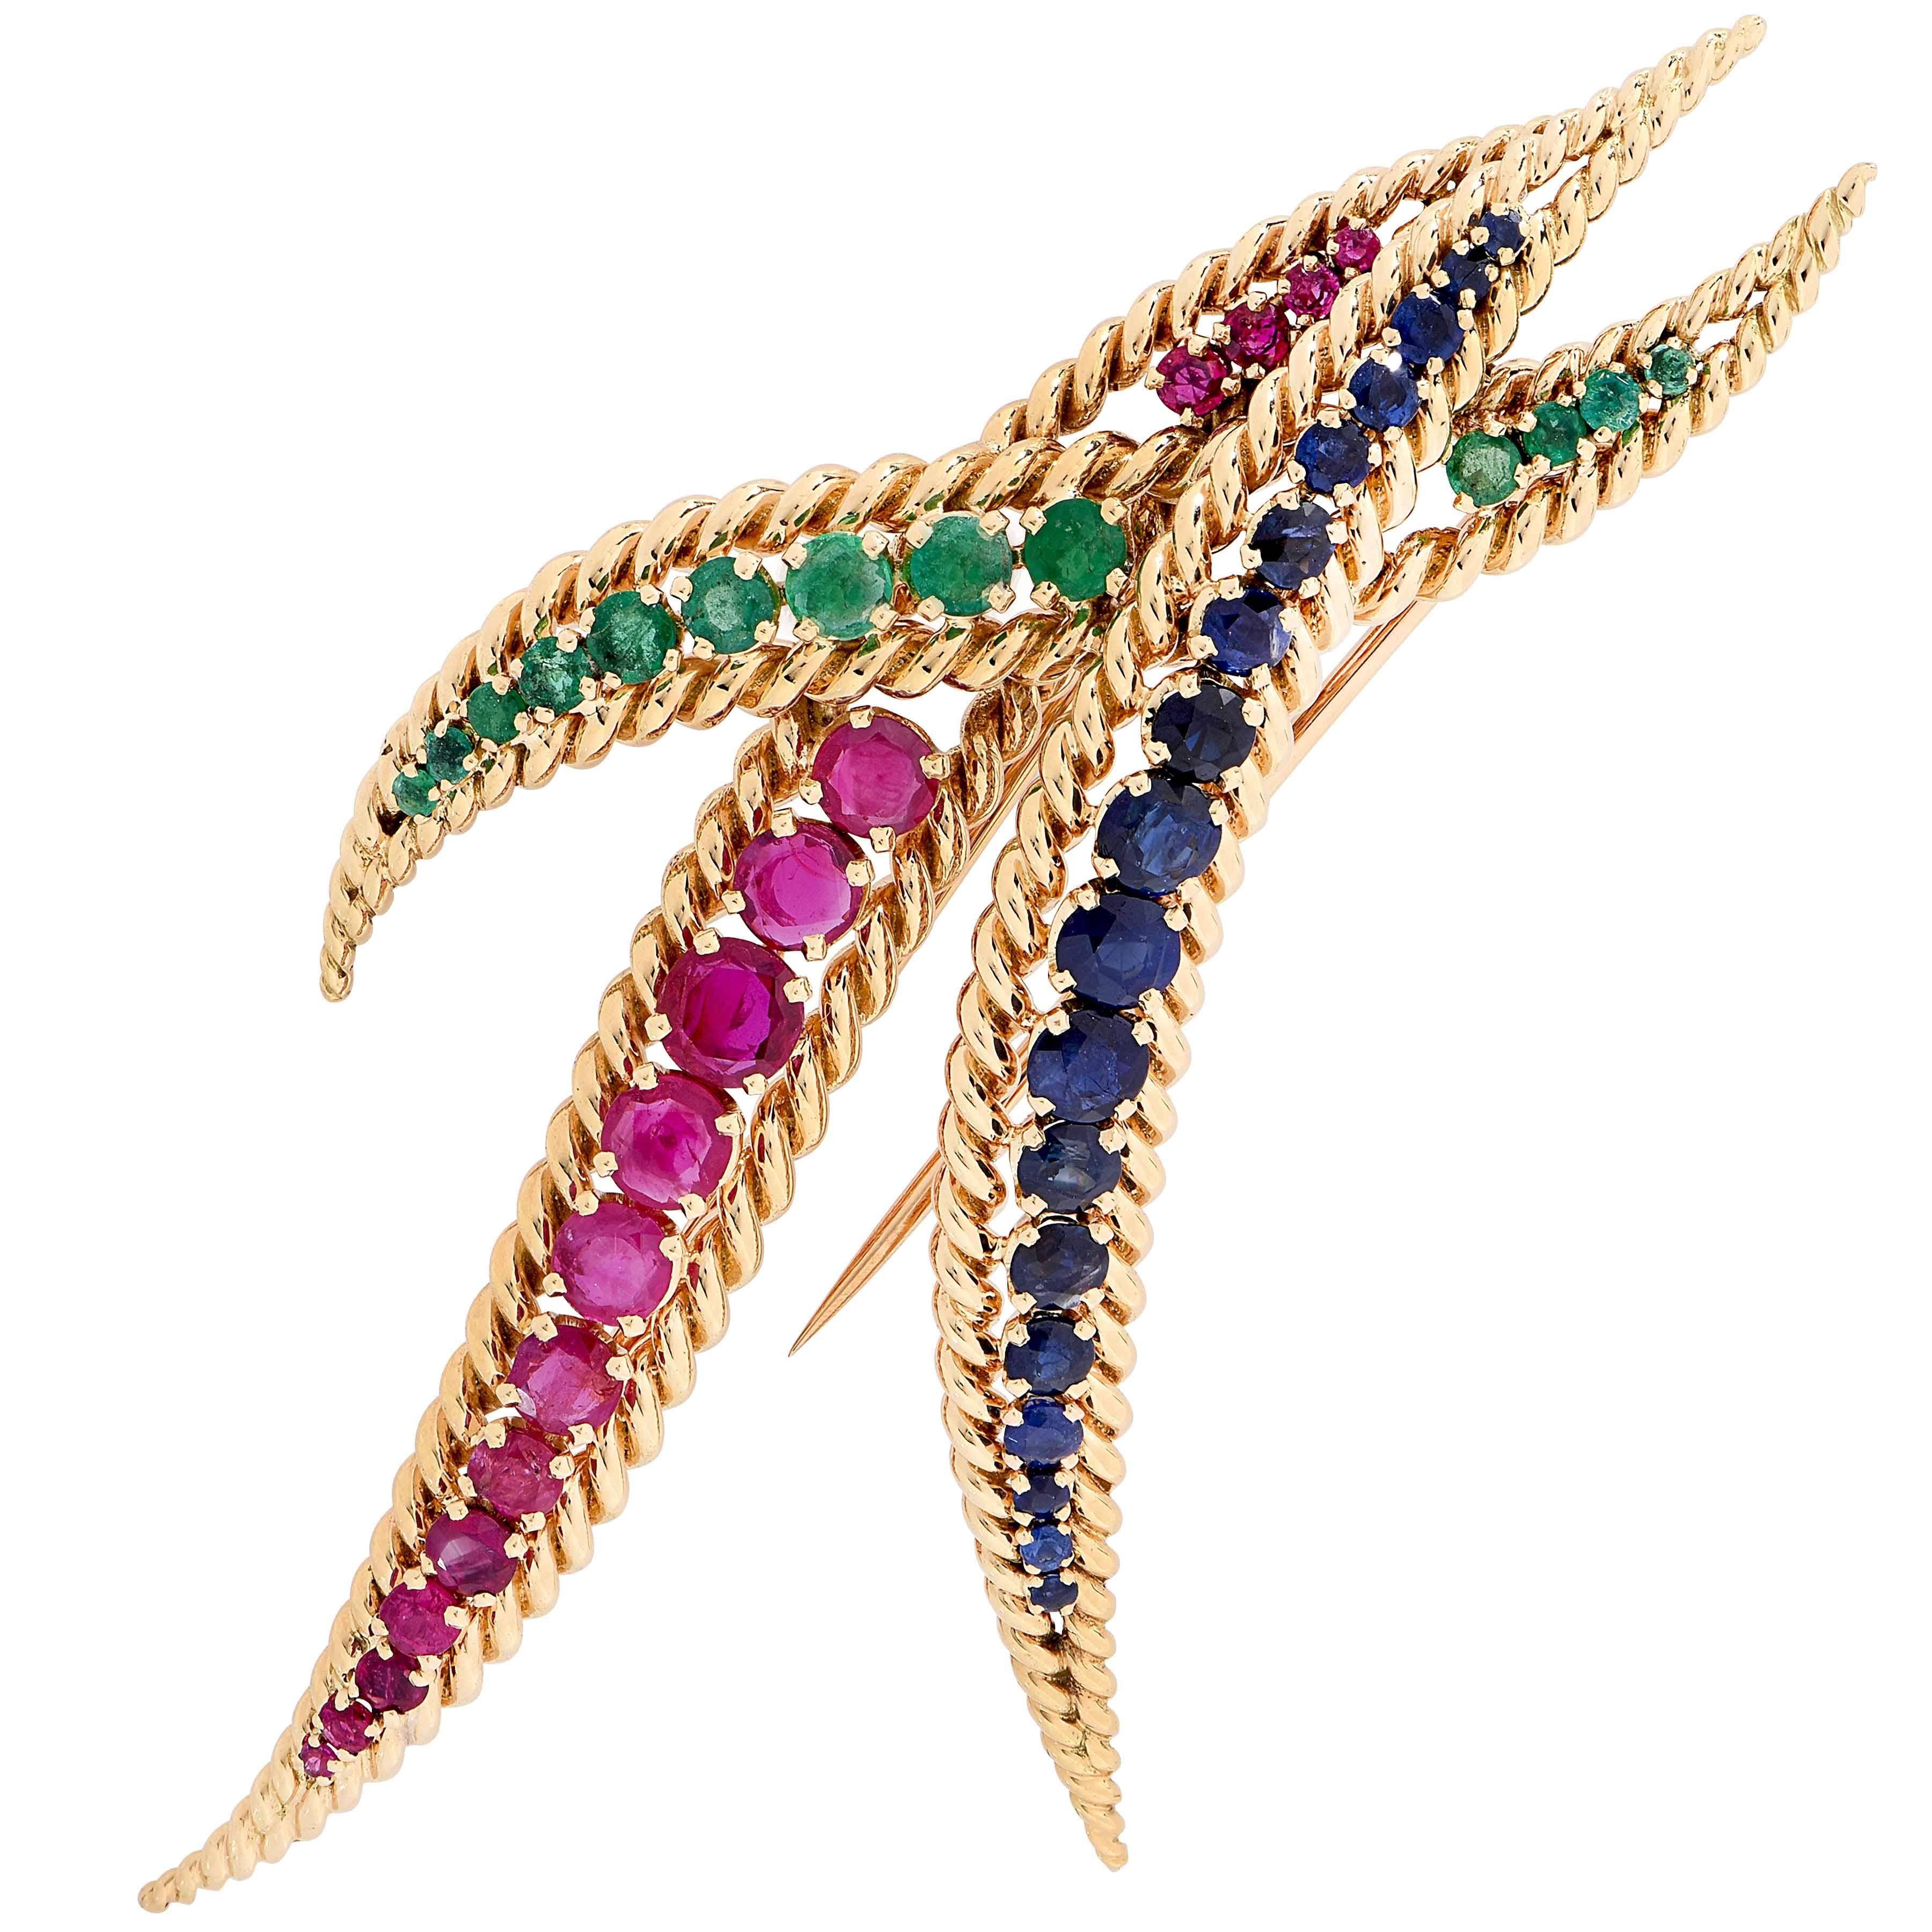 Large Mauboussin brooch set with 13 emeralds weighing approximately 1 carat, 18 sapphires weighing approximately 3 carats and 16 rubies weighing approximately 3.50 carats. Numbered and signed Mauboussin Paris. 

Metal Type: 18Kt Yellow Gold
Metal